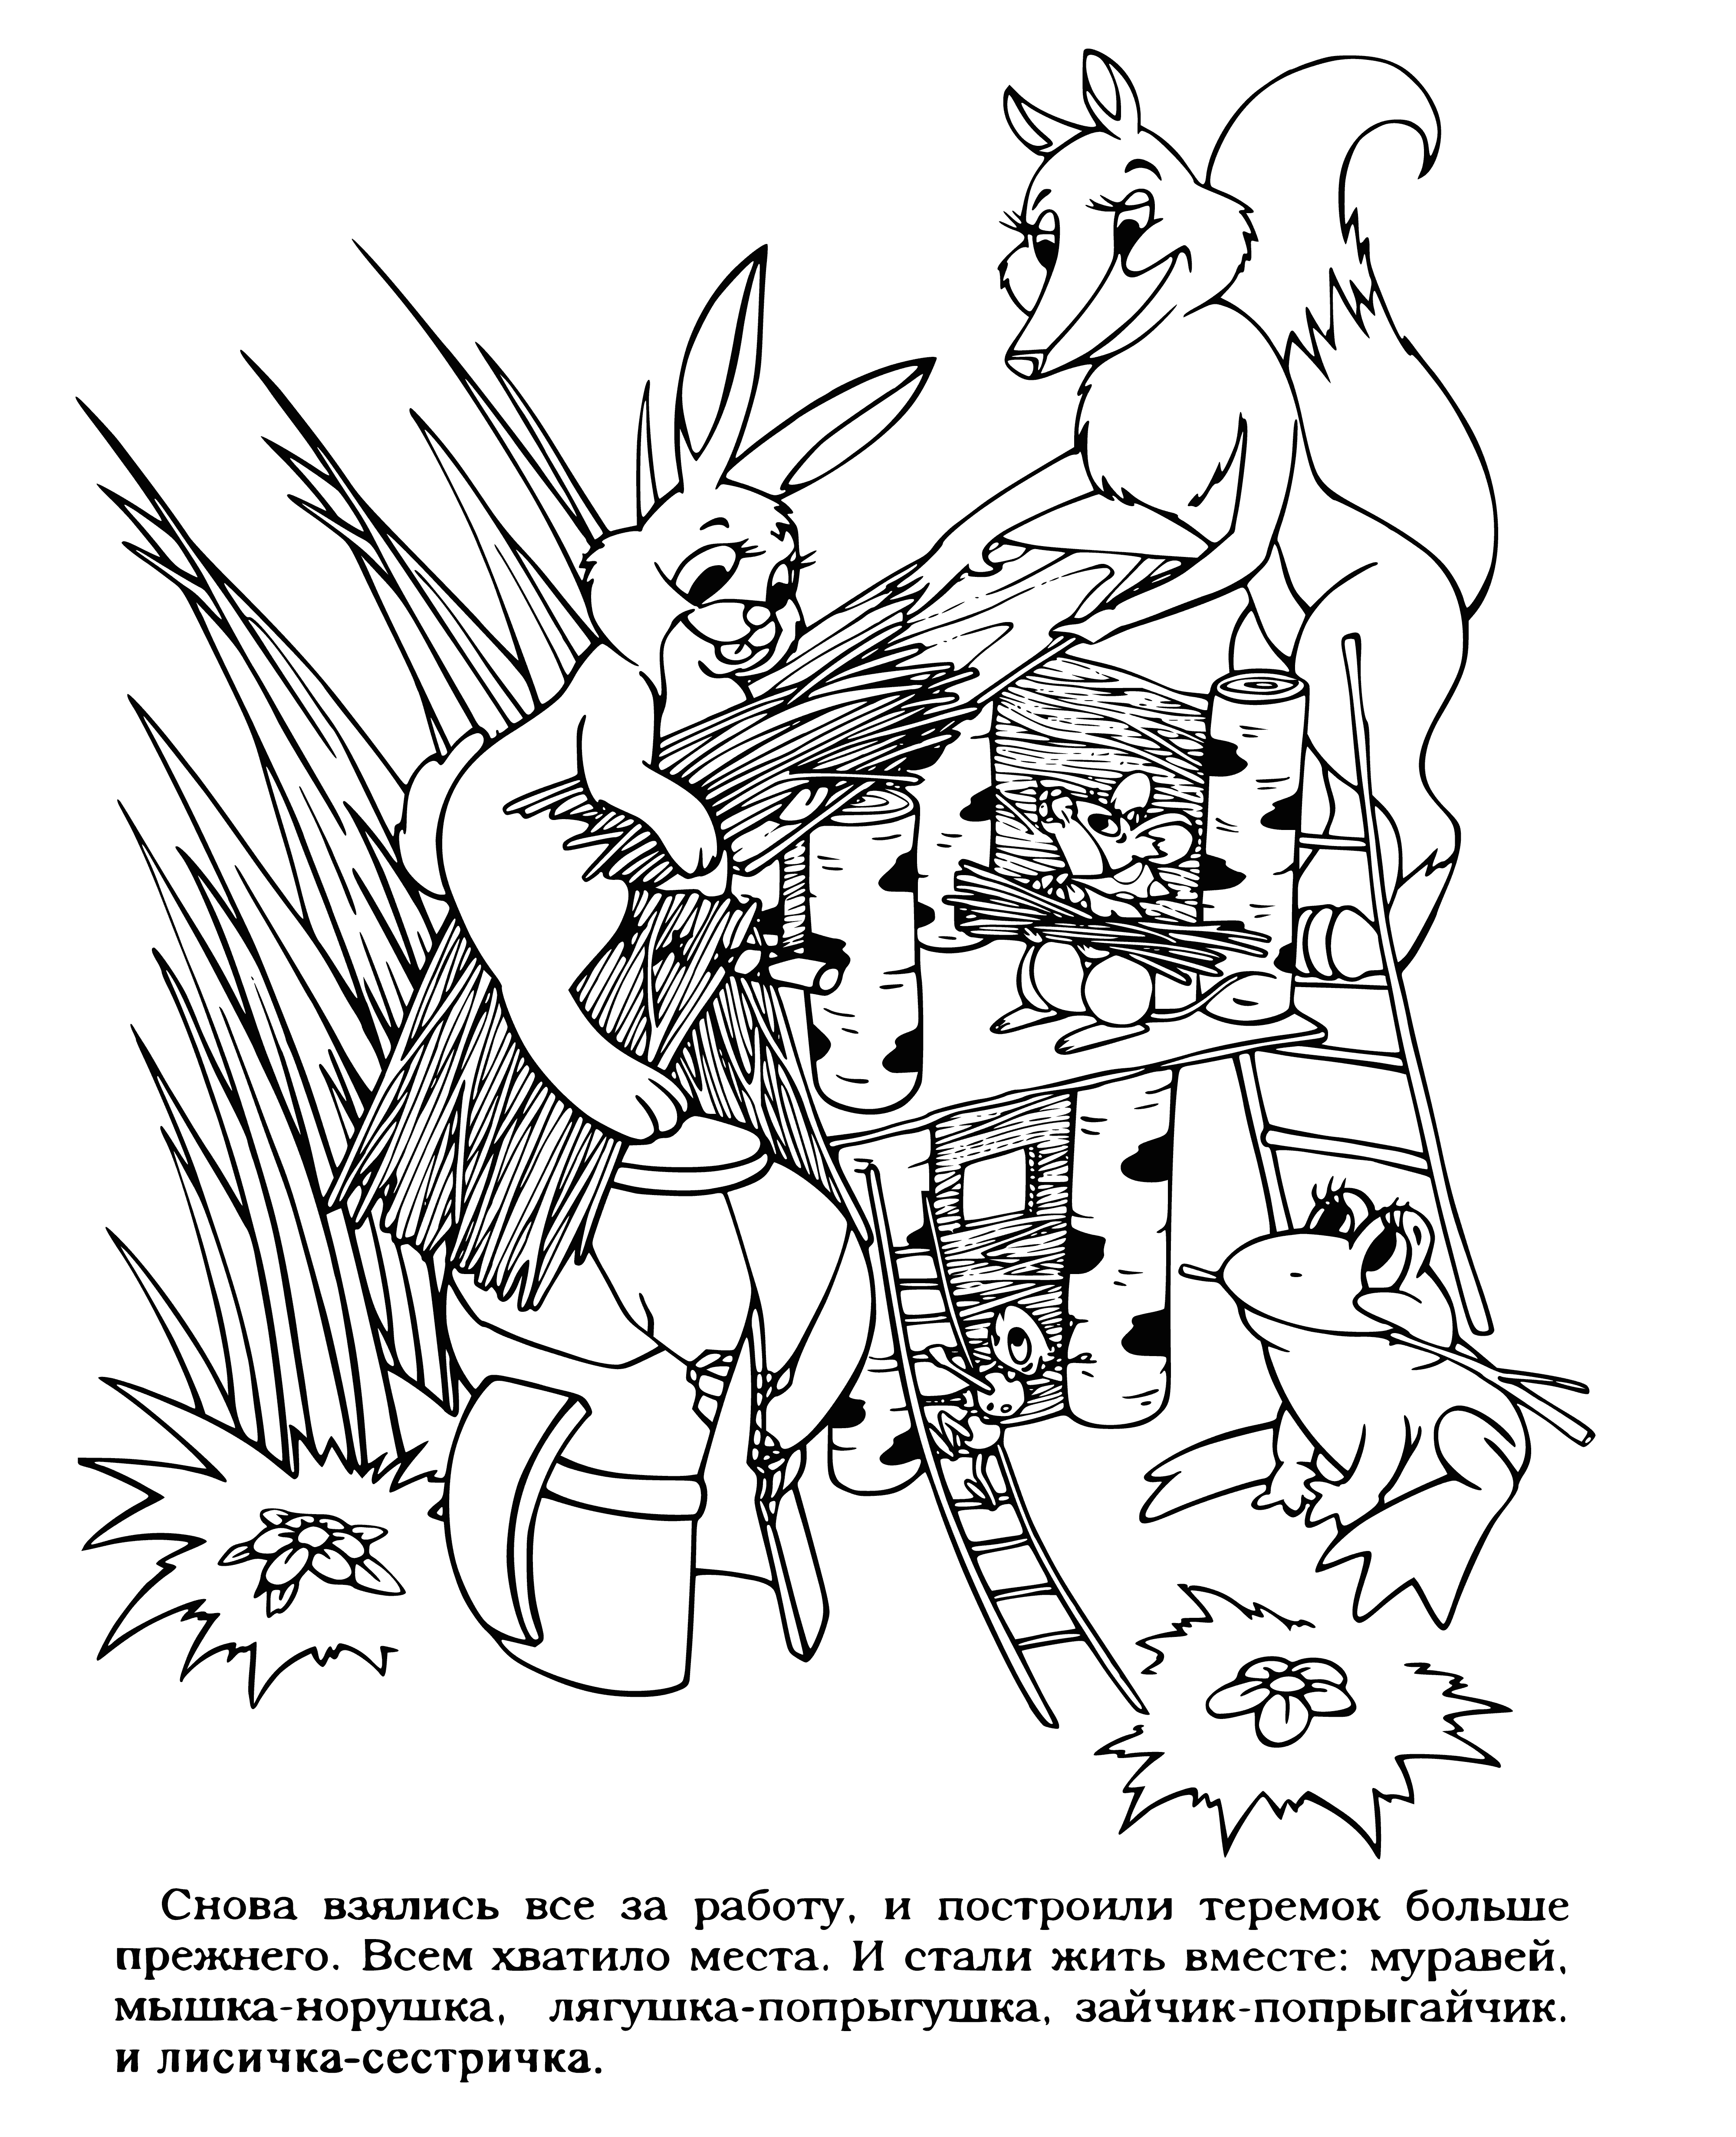 coloring page: A small girl stands in front of a forest house w/ a thatched roof, chimney, door & window. She holds a basket of mushrooms & wears a red dress & white scarf.